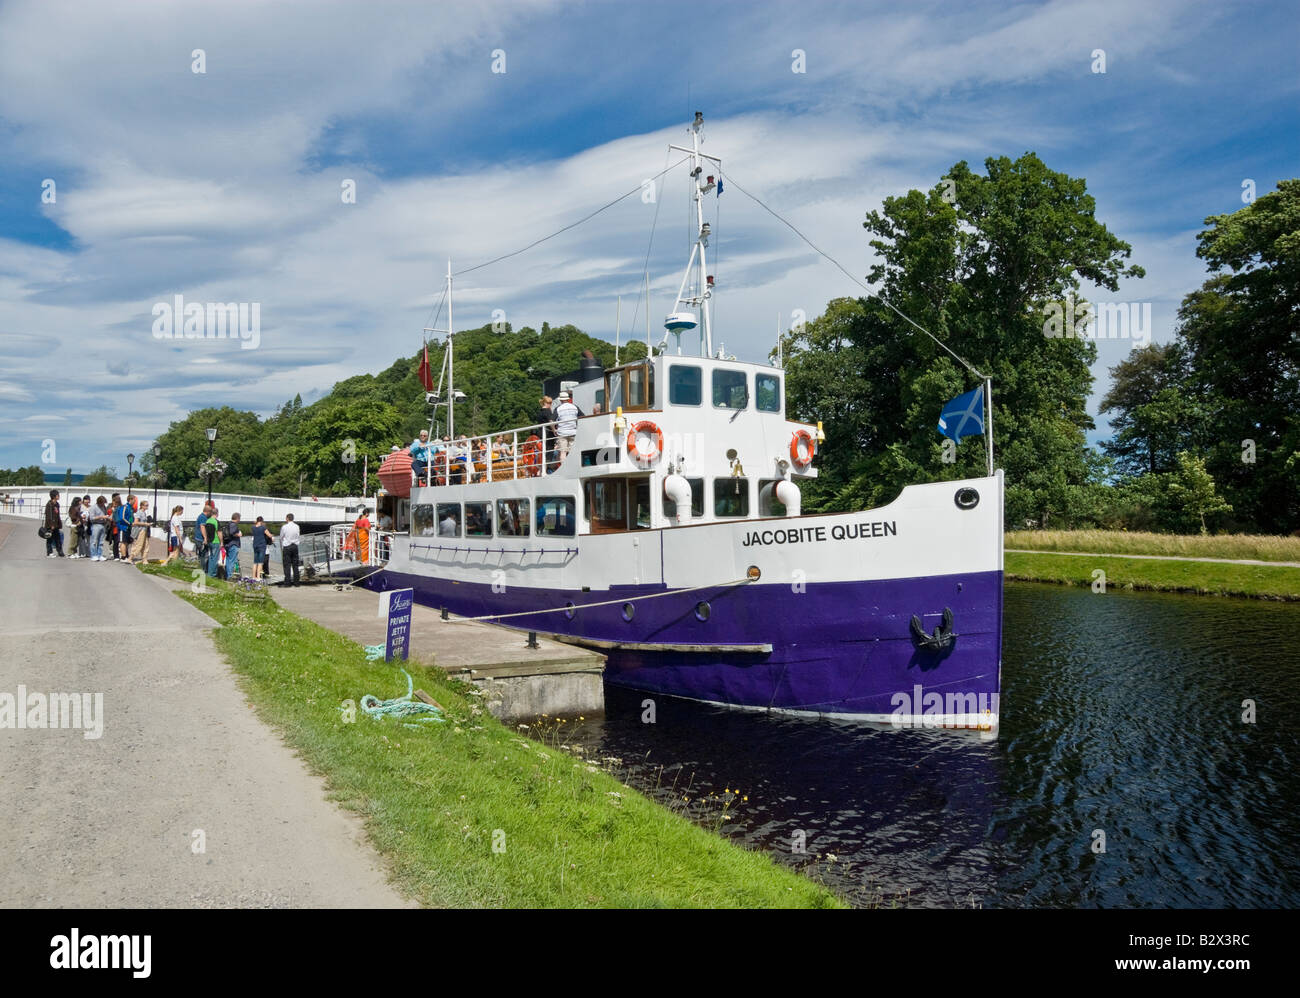 Cruise vessel Jacobite Queen moored on the Caledonian Canal in Inverness taking on passengers for a cruise on Loch Ness Stock Photo